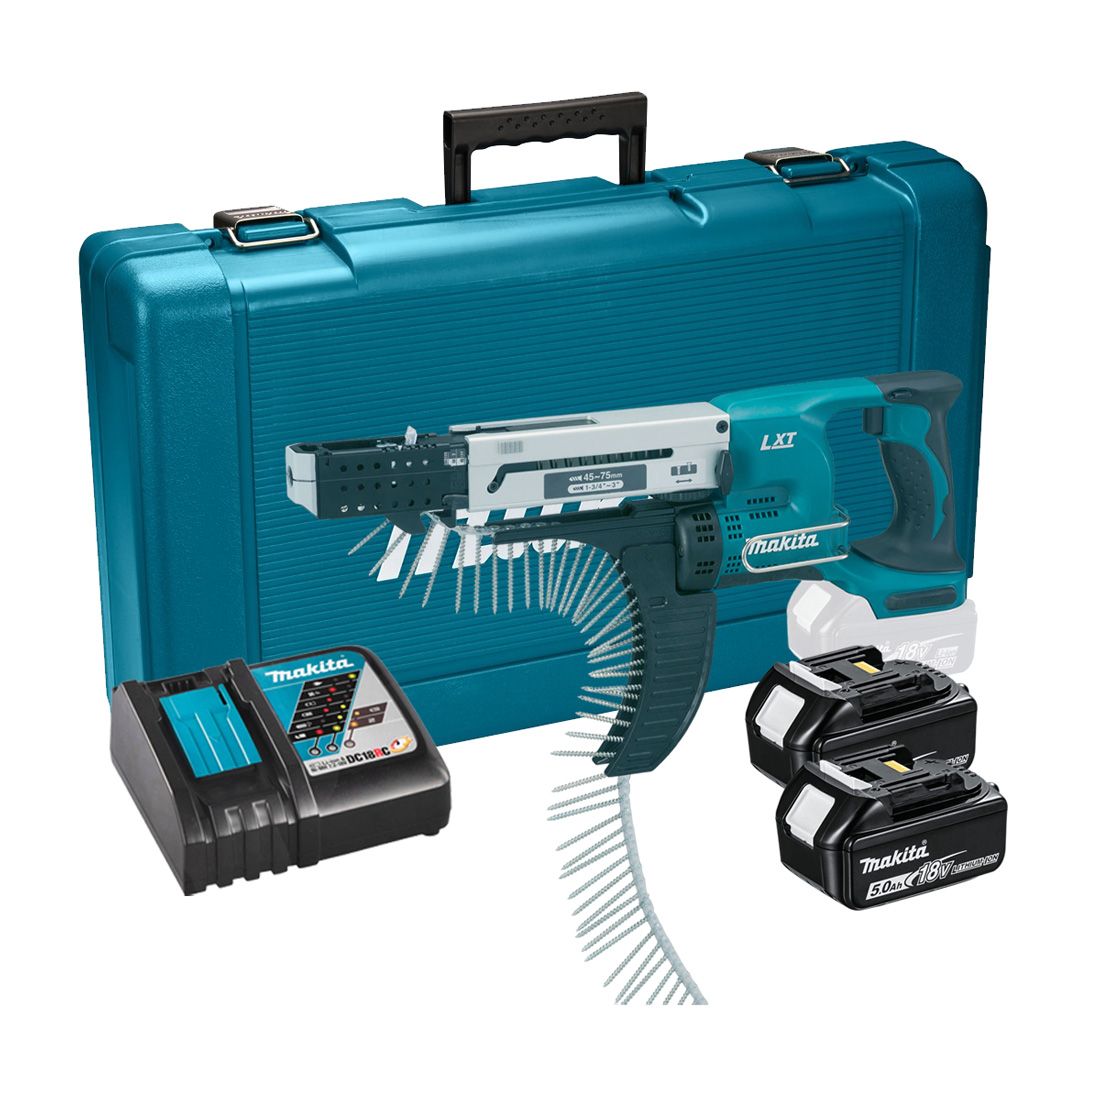 Makita DFR750RTE 18V 45 – 75 mm Auto-Feed Screwdriver With 2 X 5.0Ah Batteries Charger & Case